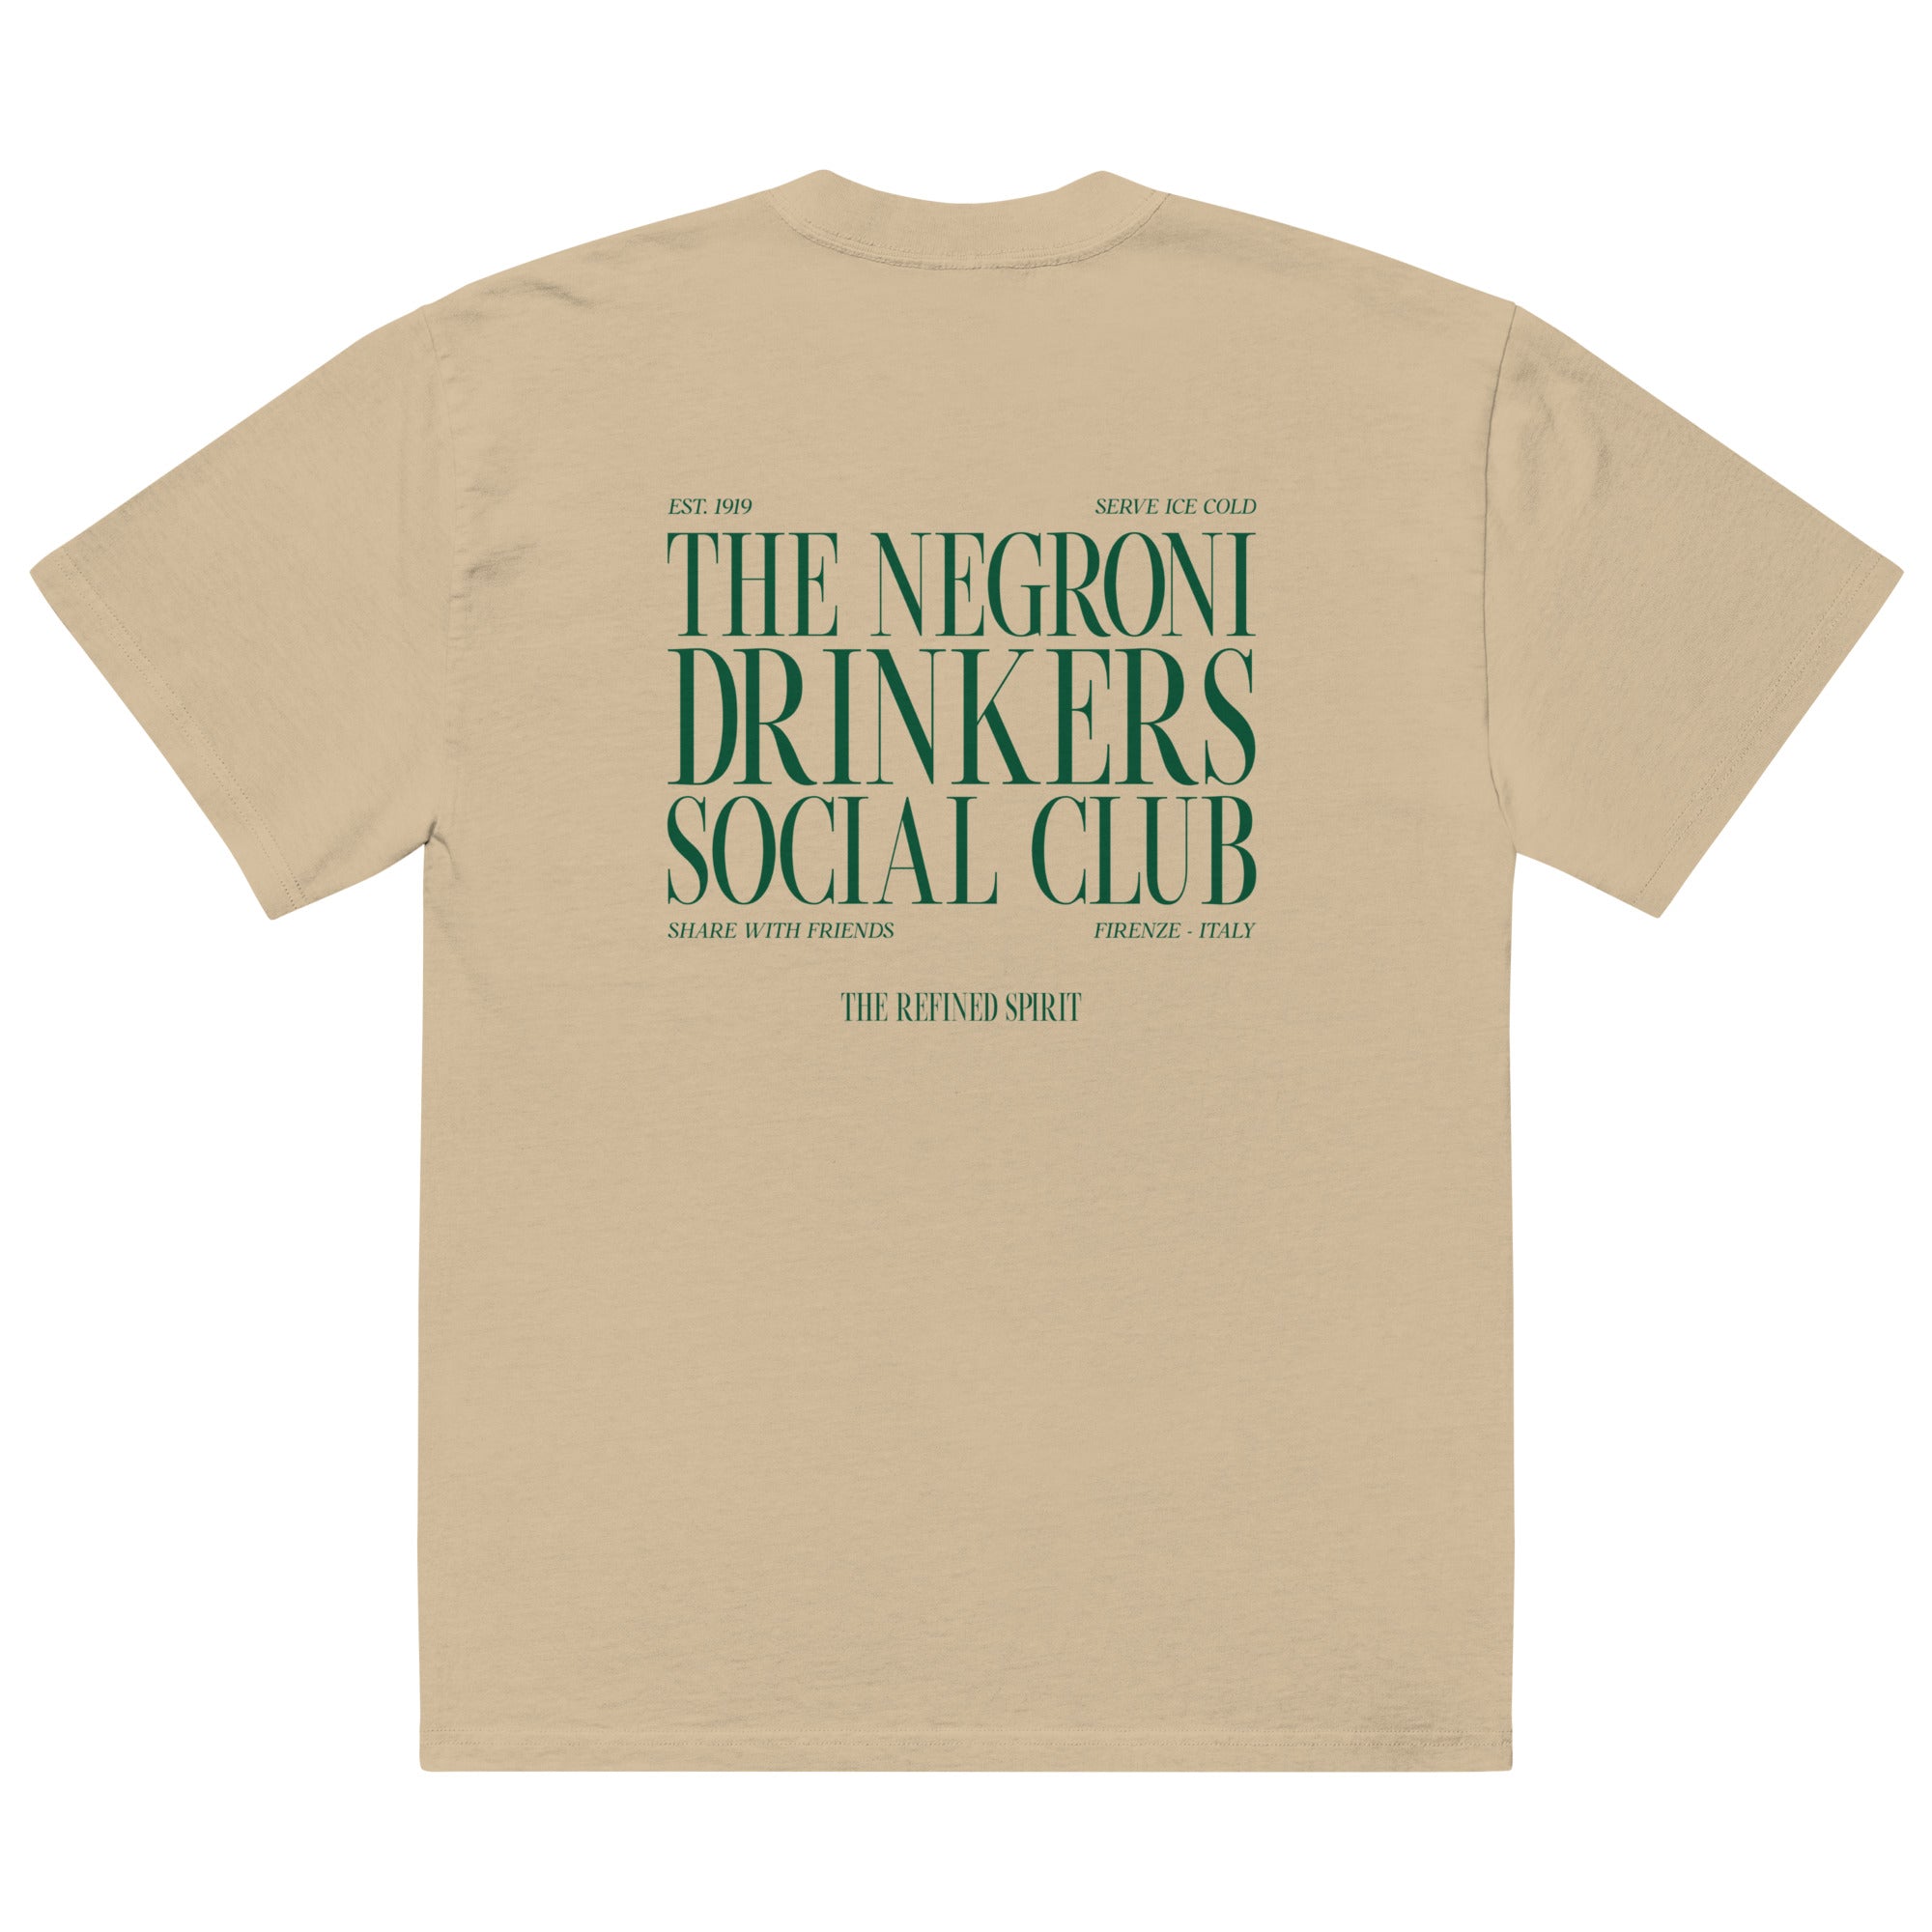 The Negroni Drinkers Social Club - Oversized T-shirt